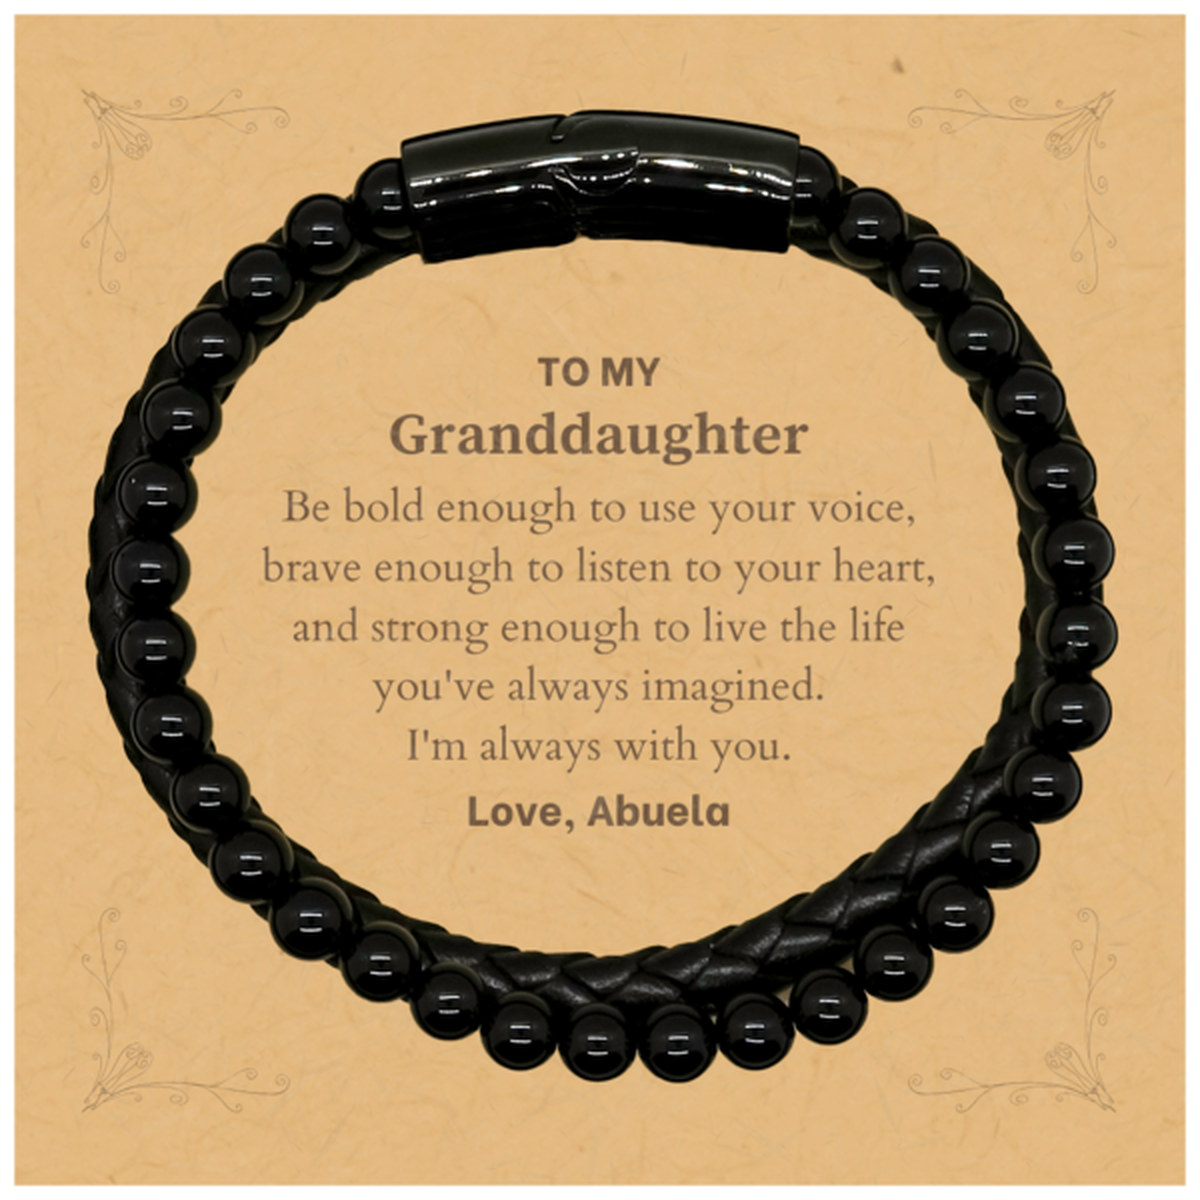 Keepsake Granddaughter Stone Leather Bracelets Gift Idea Graduation Christmas Birthday Granddaughter from Abuela, Granddaughter Be bold enough to use your voice, brave enough to listen to your heart. Love, Abuela